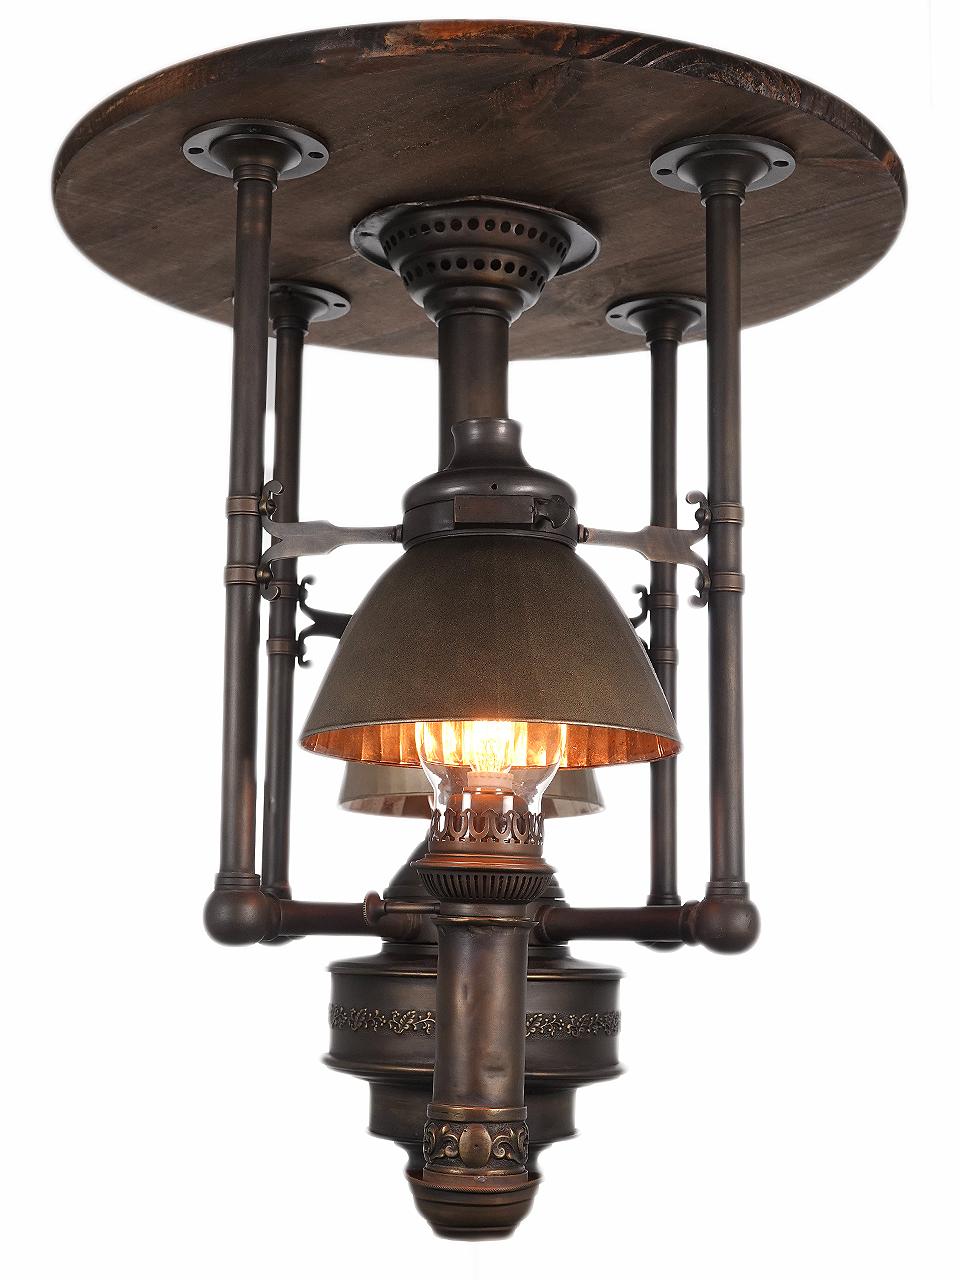 19th Century Museum Quality Hicks and Smith Rail Car Center Lamp